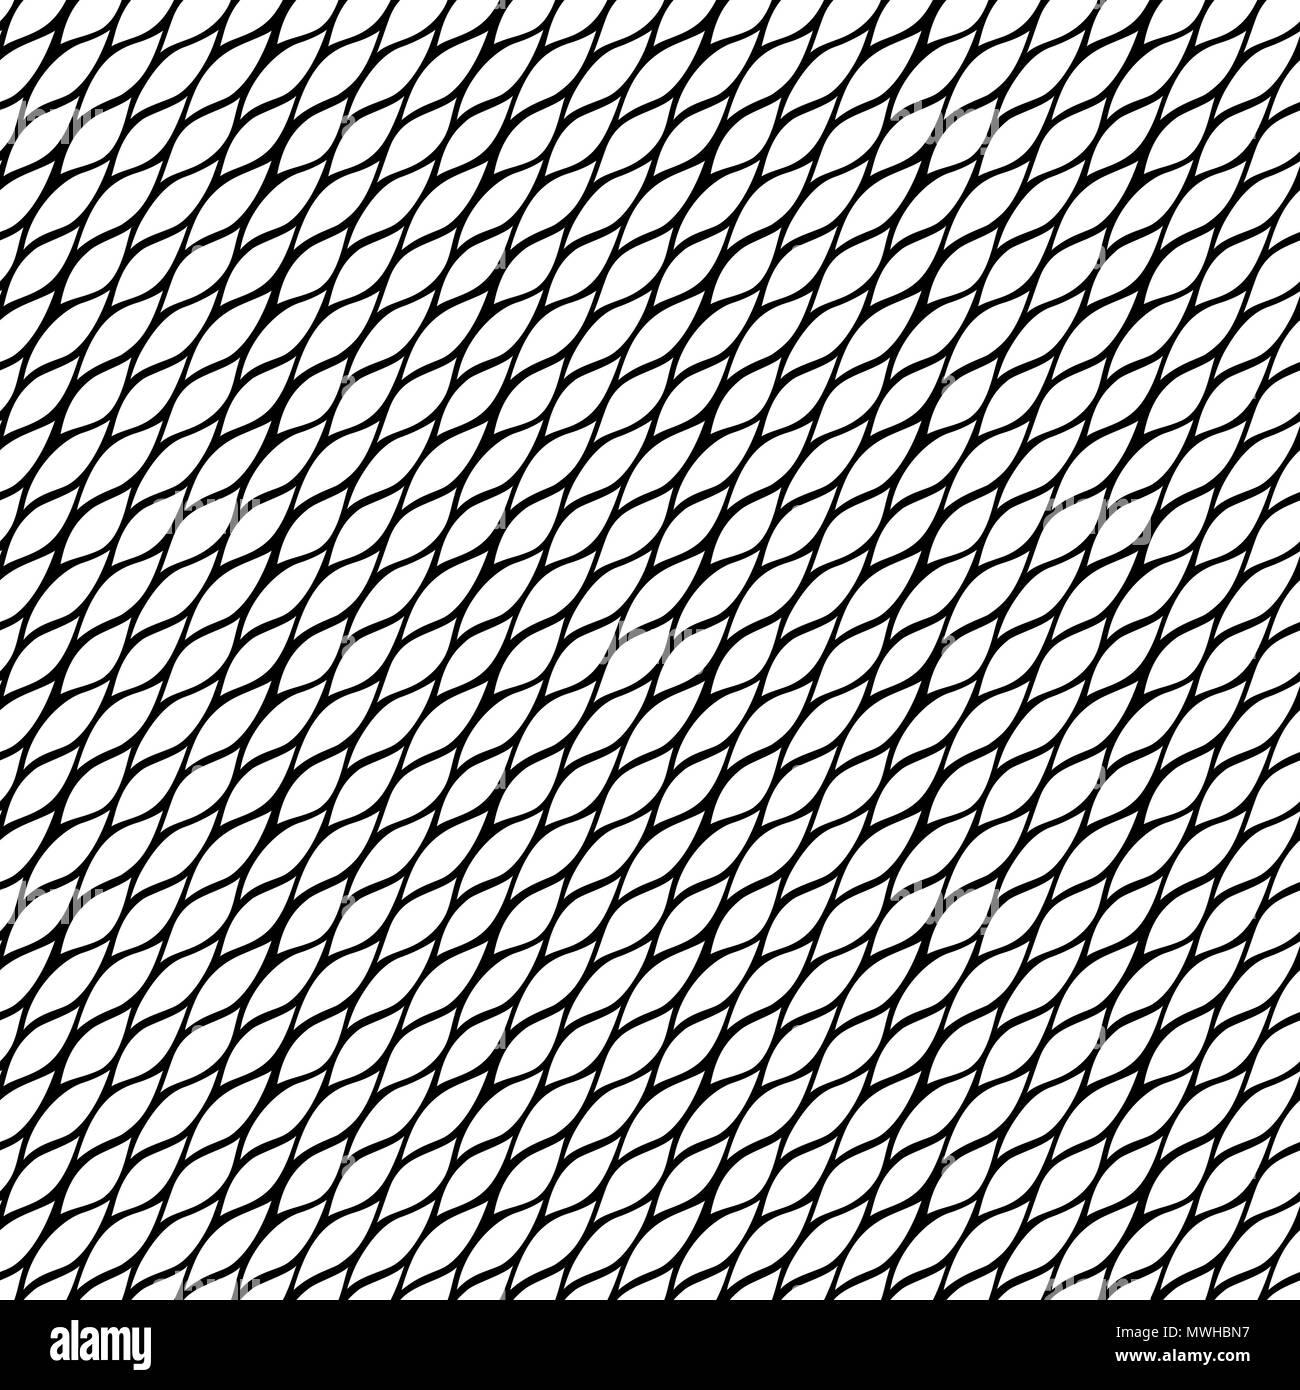 Seamless vector pattern with wavy interwoven lines black color on the ...